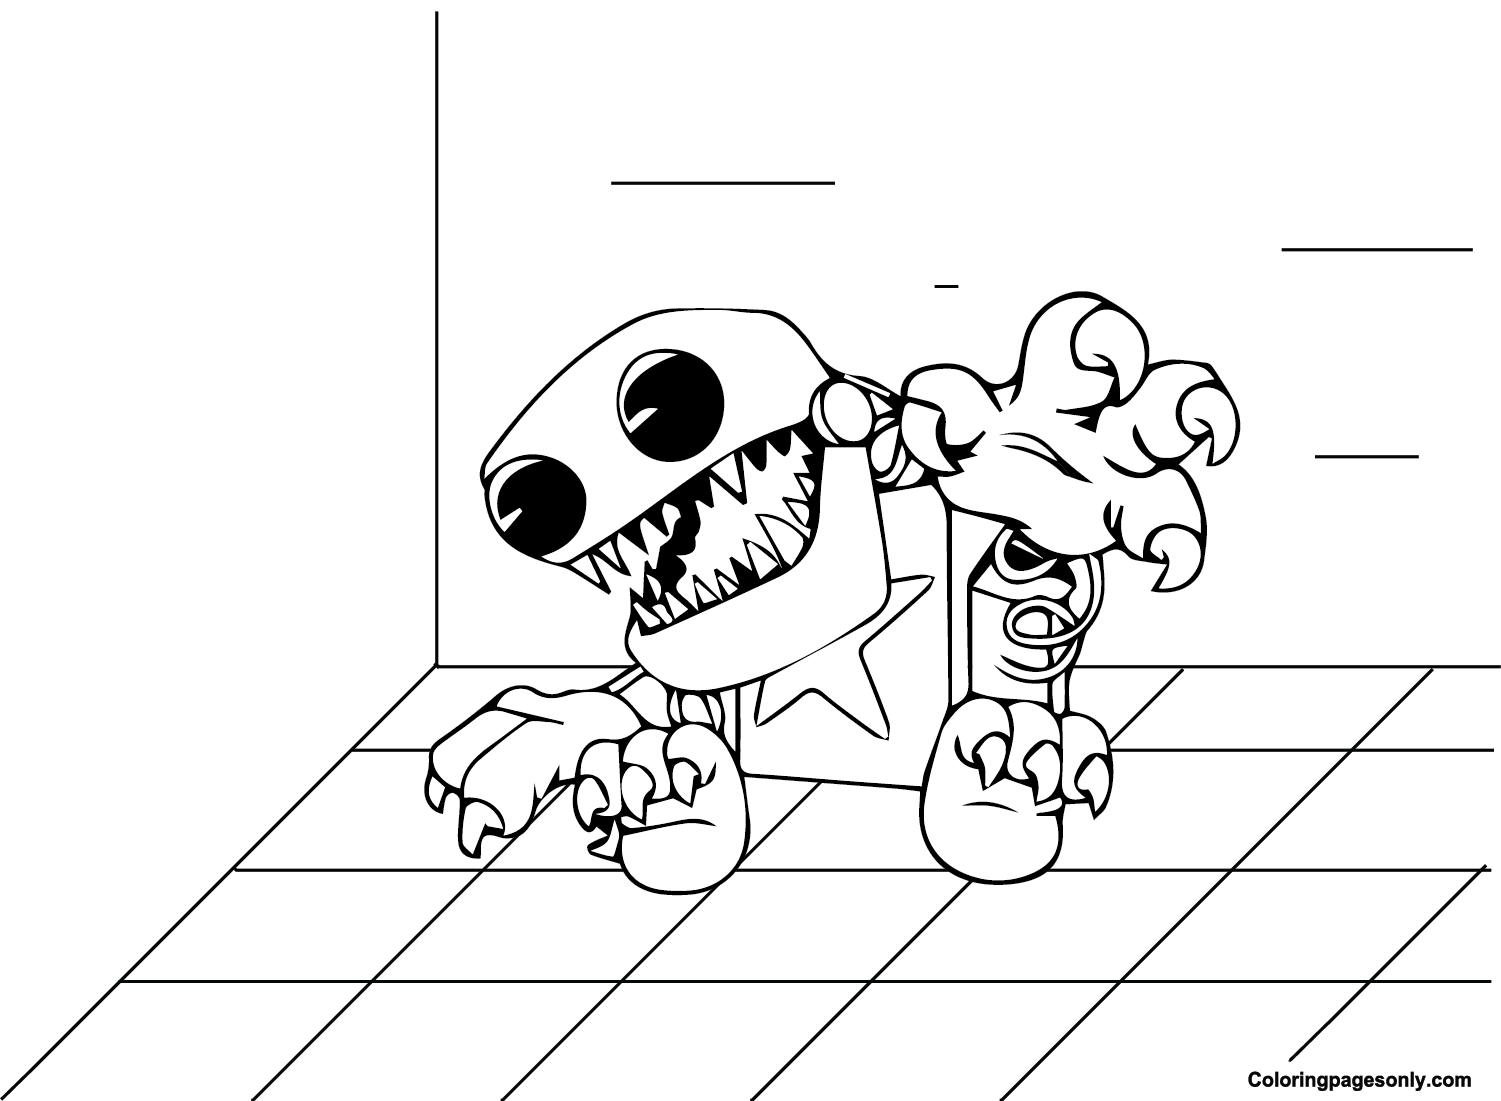 Boxy Boo Download Coloring Pages